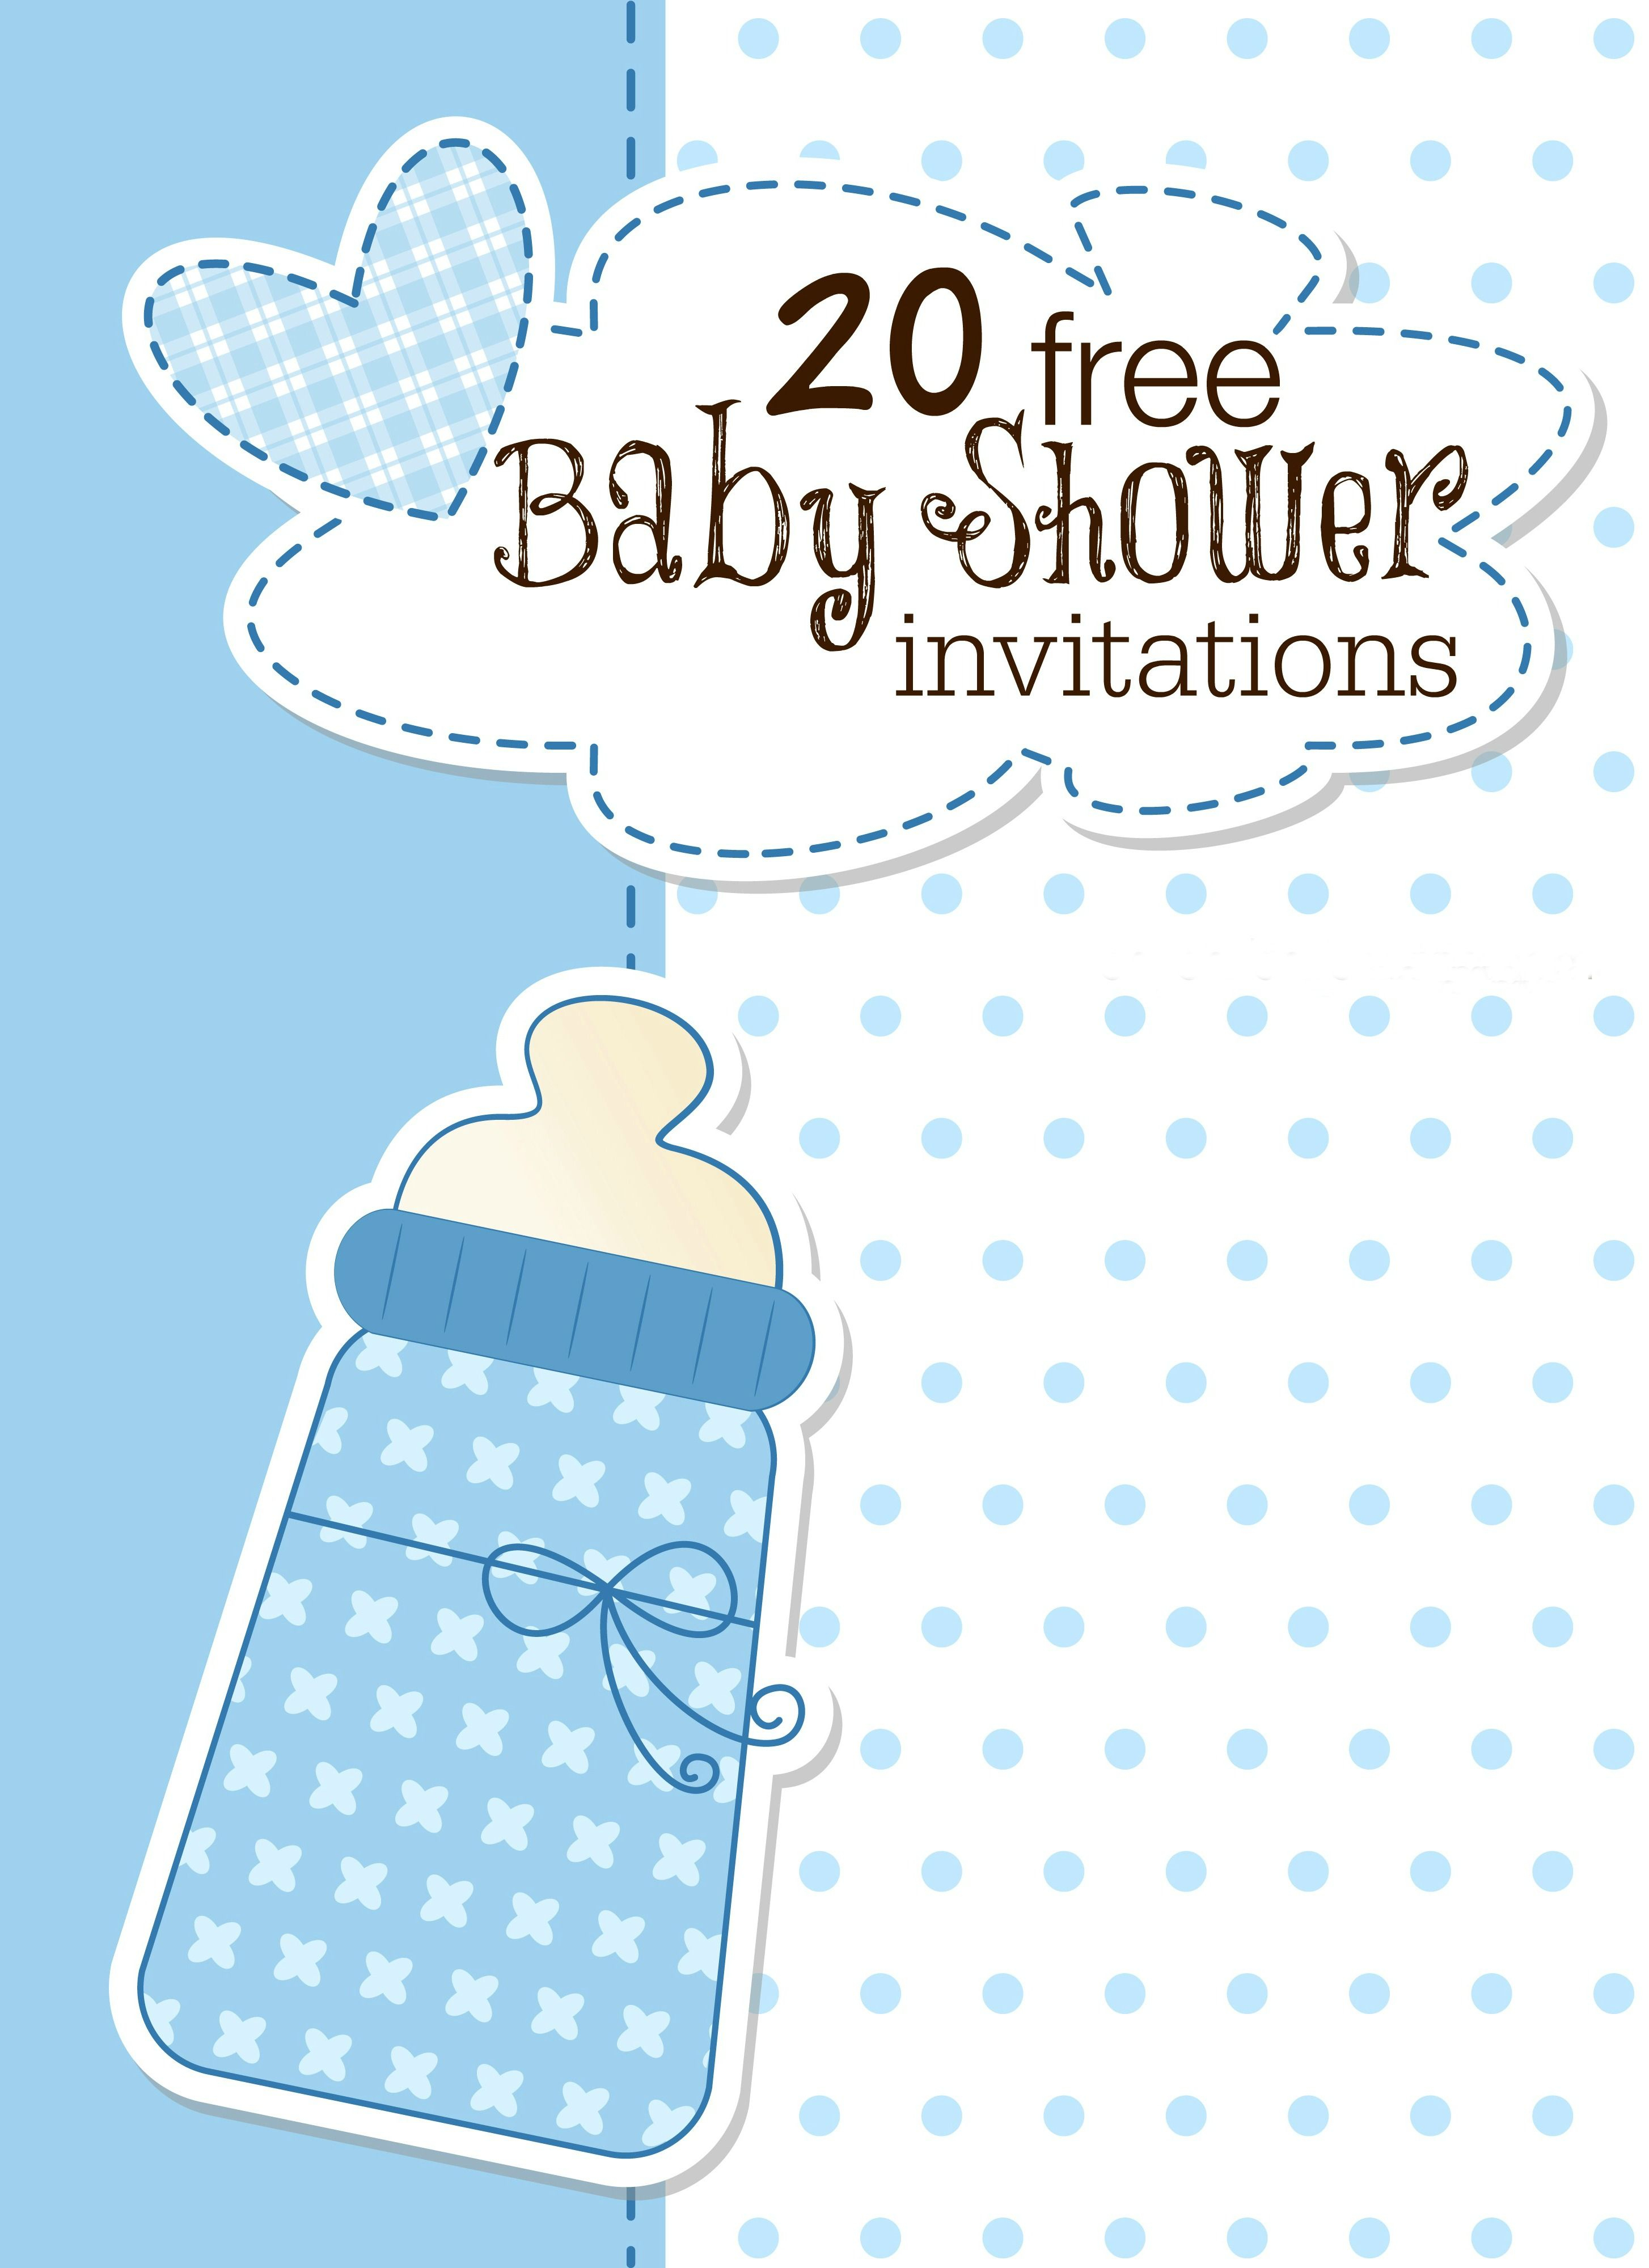 Are You Planning A Baby Shower? You&amp;#039;ll Find This List Of Free - Free Printable Baby Shower Invitations